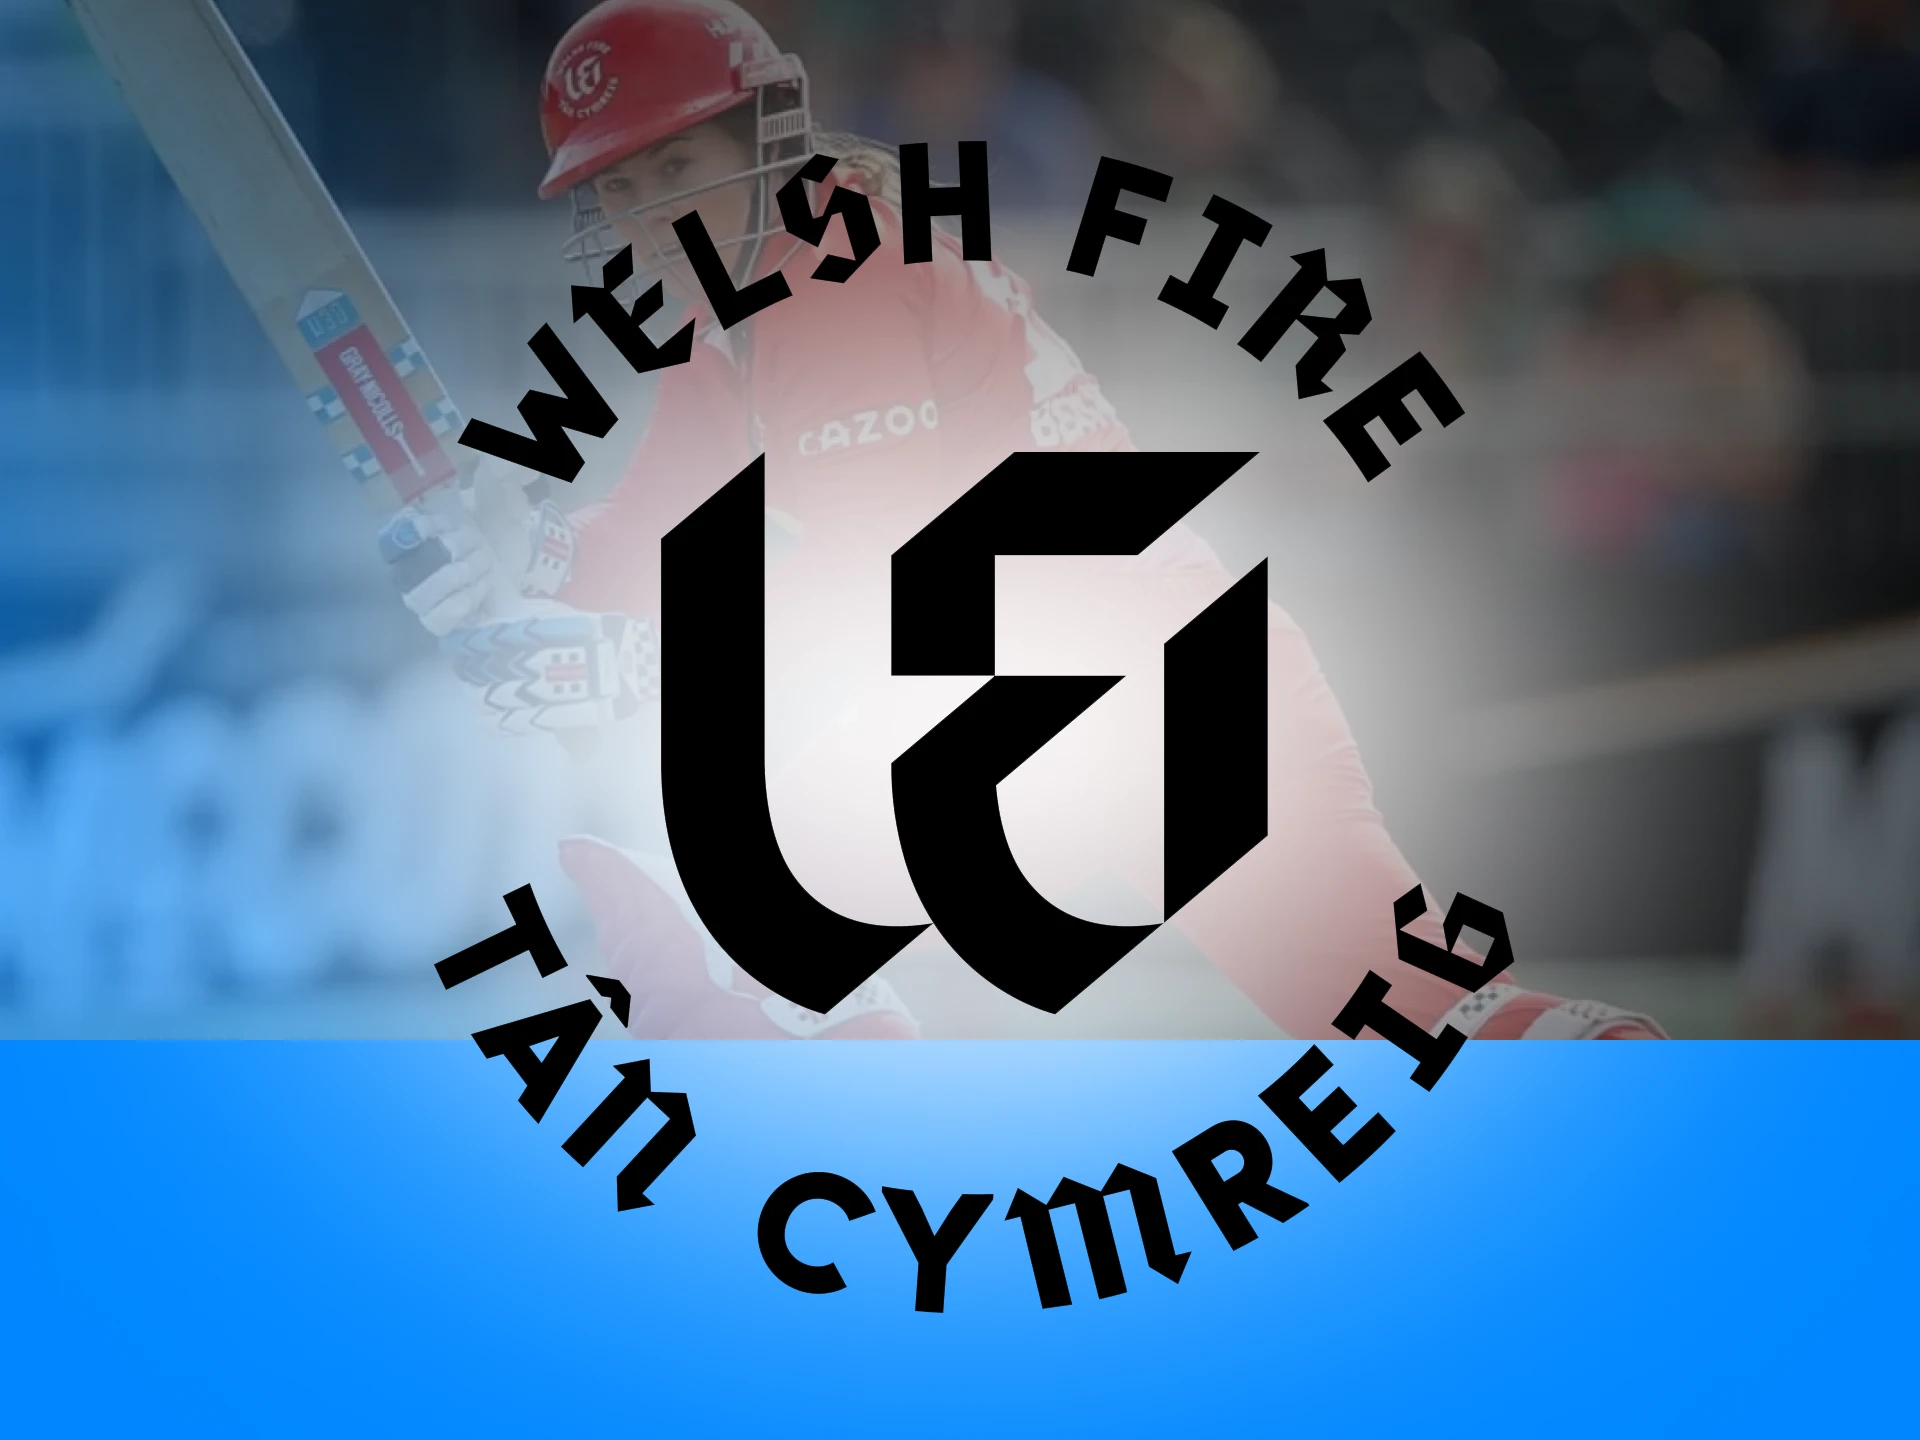 Bet on Welsh Fire team players and double your money.